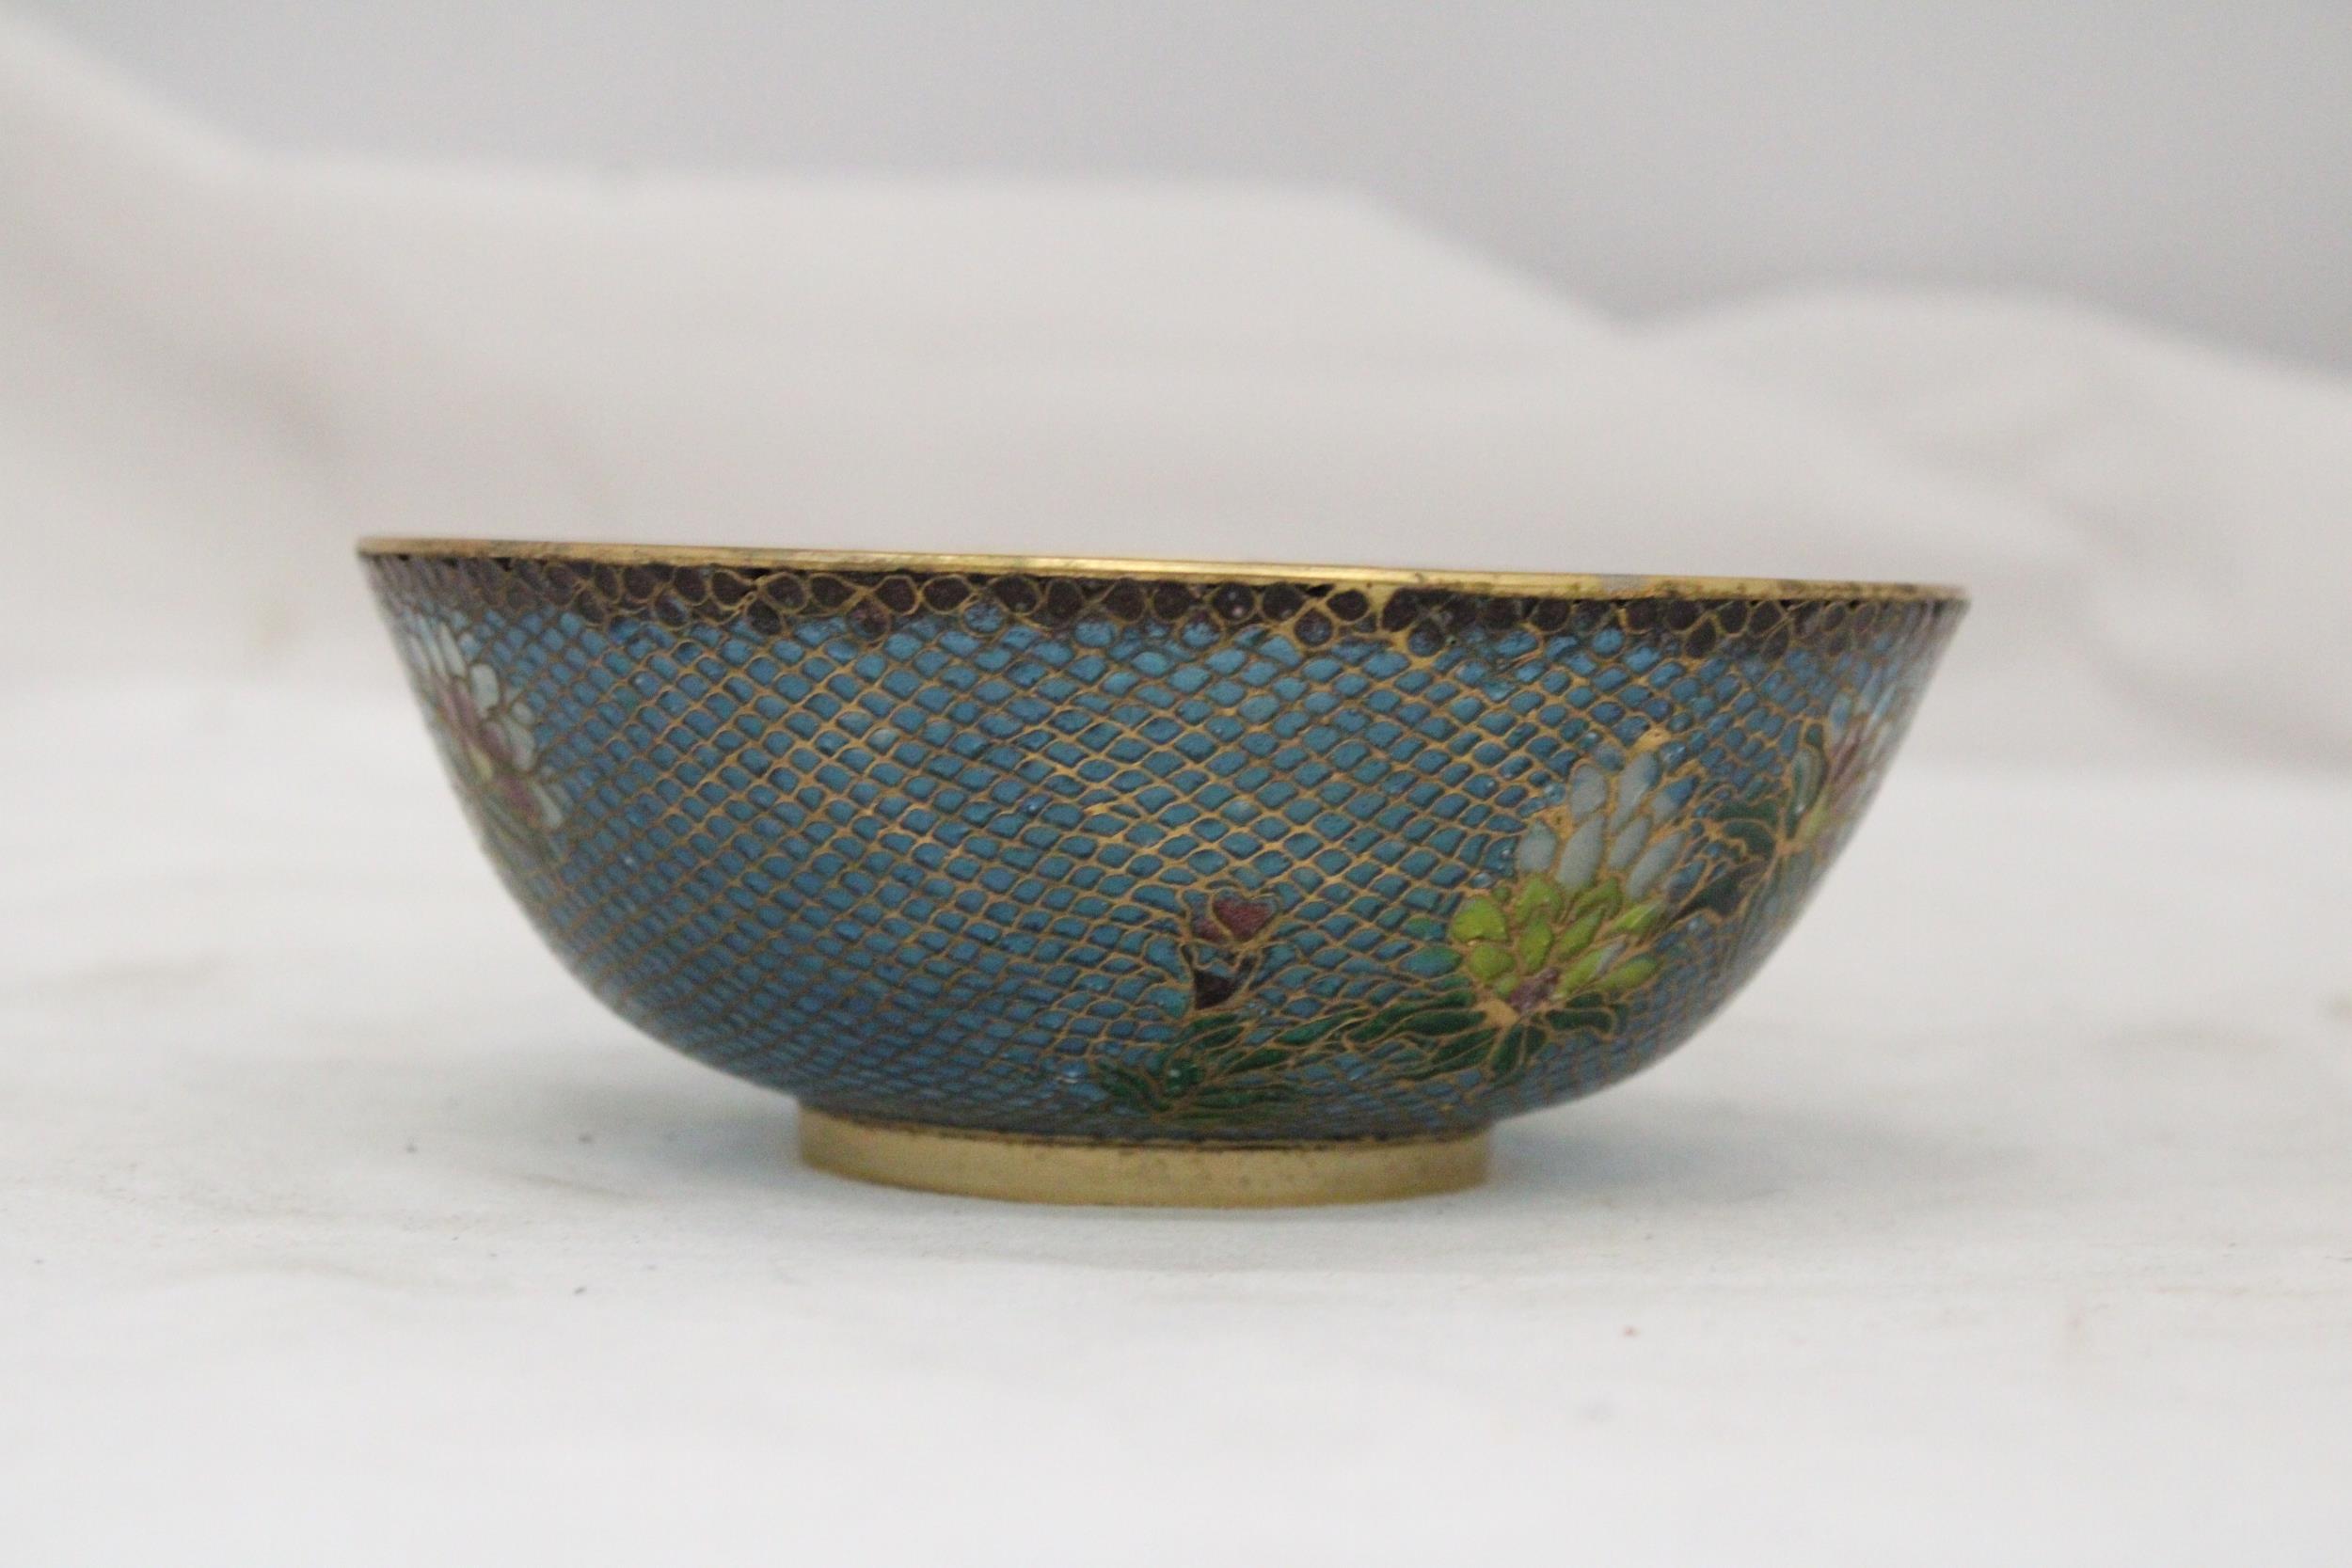 A VINTAGE CHINESE STYLE BRASS FILIGREE AND ENAMEL BOWL ON WOODEN STAND - Image 2 of 5